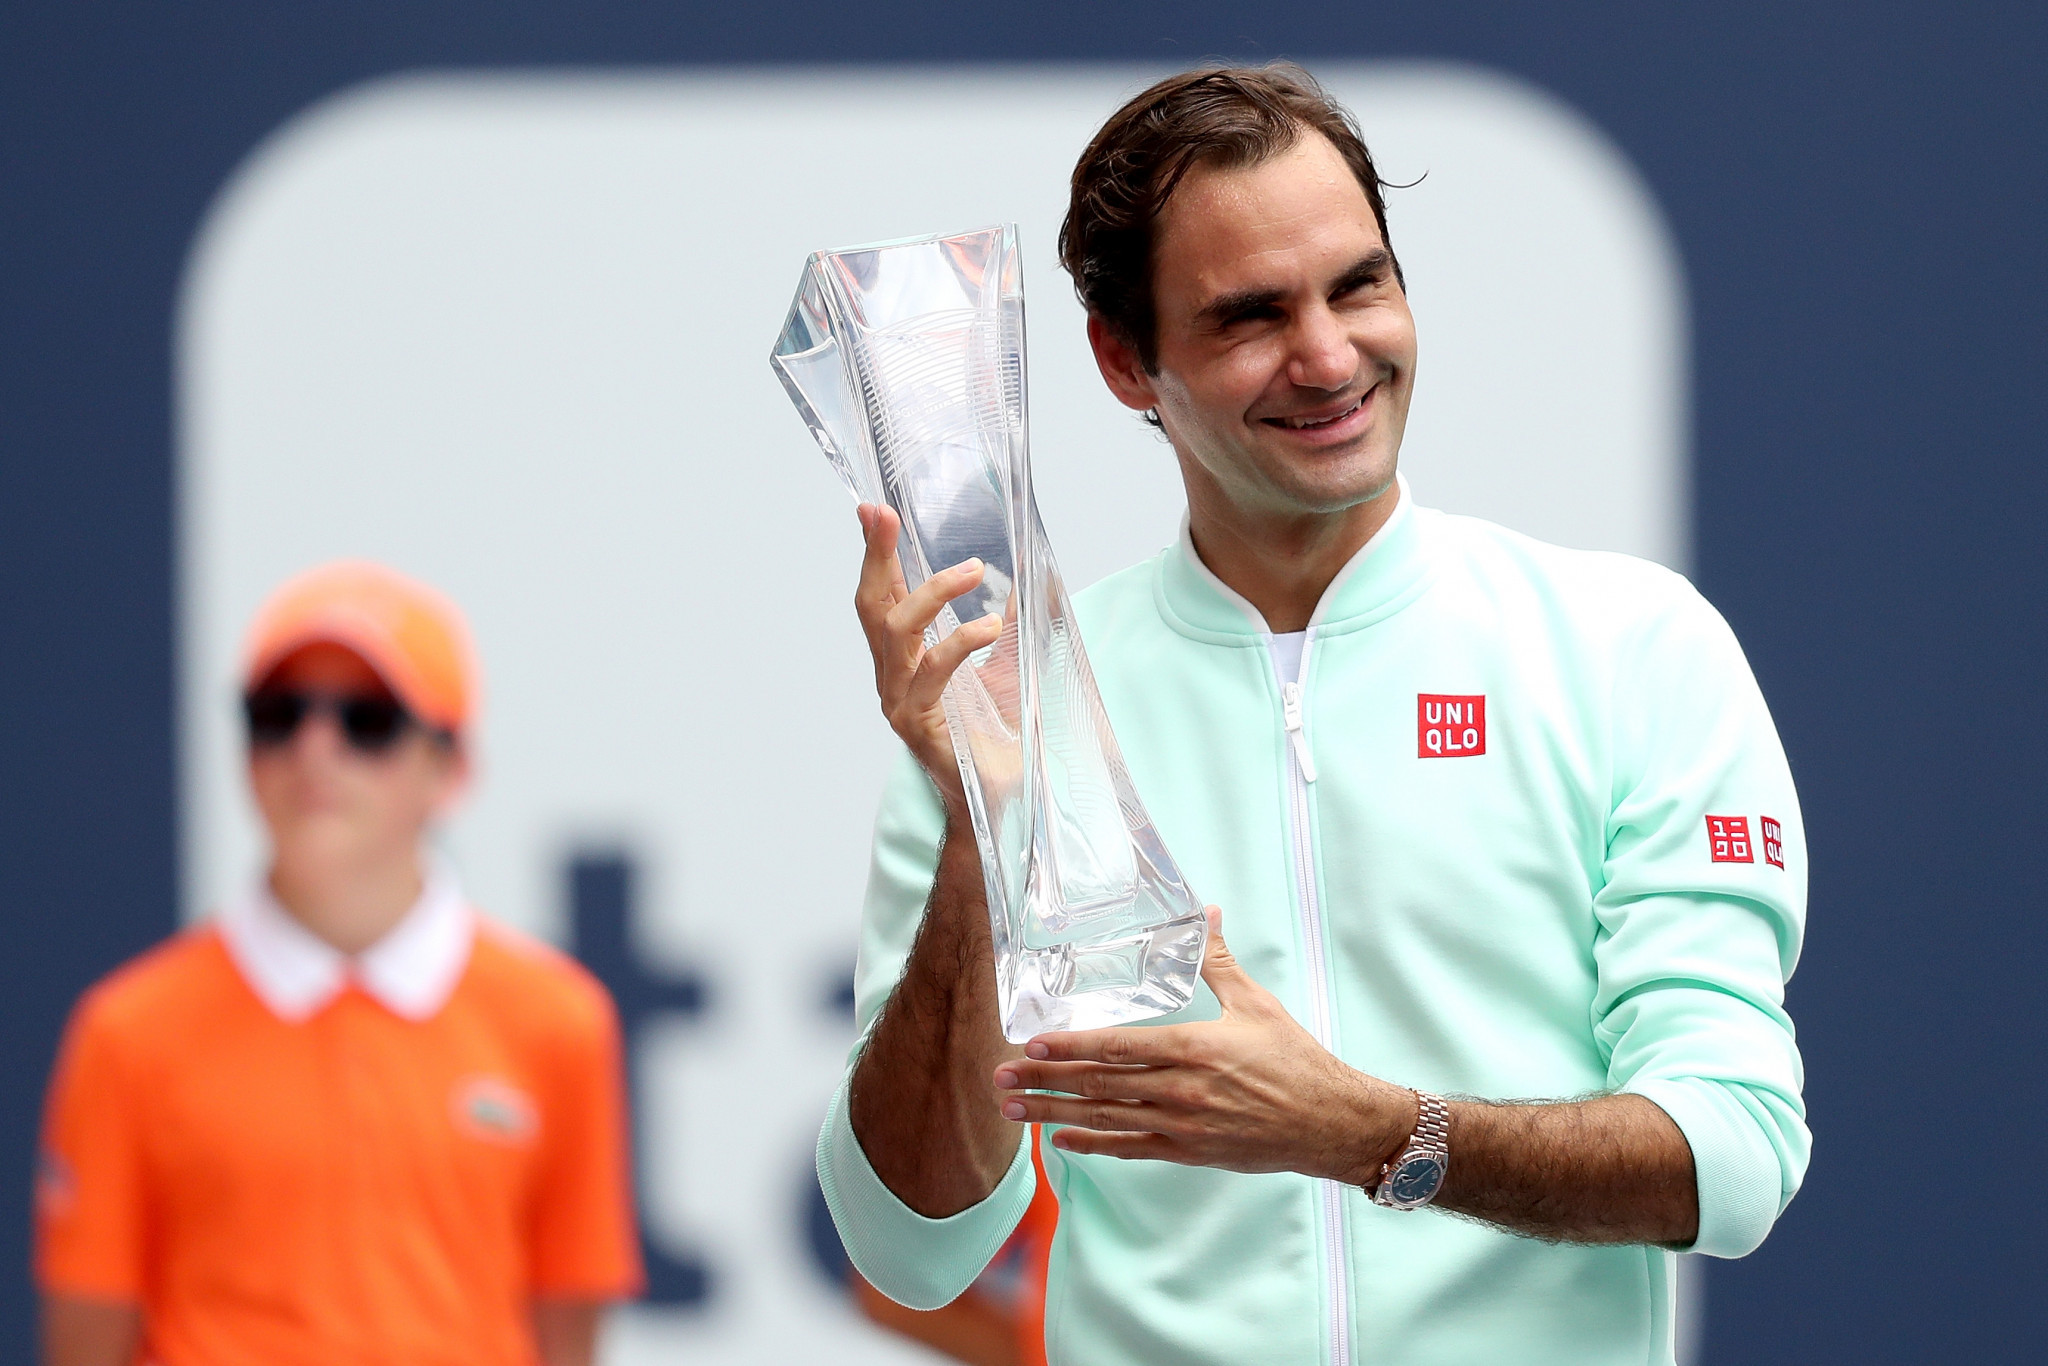 Roger Federer, who has recently returned to the tour after a long injury absence, has decided not to defend his men's singles title in Miami ©Getty Images